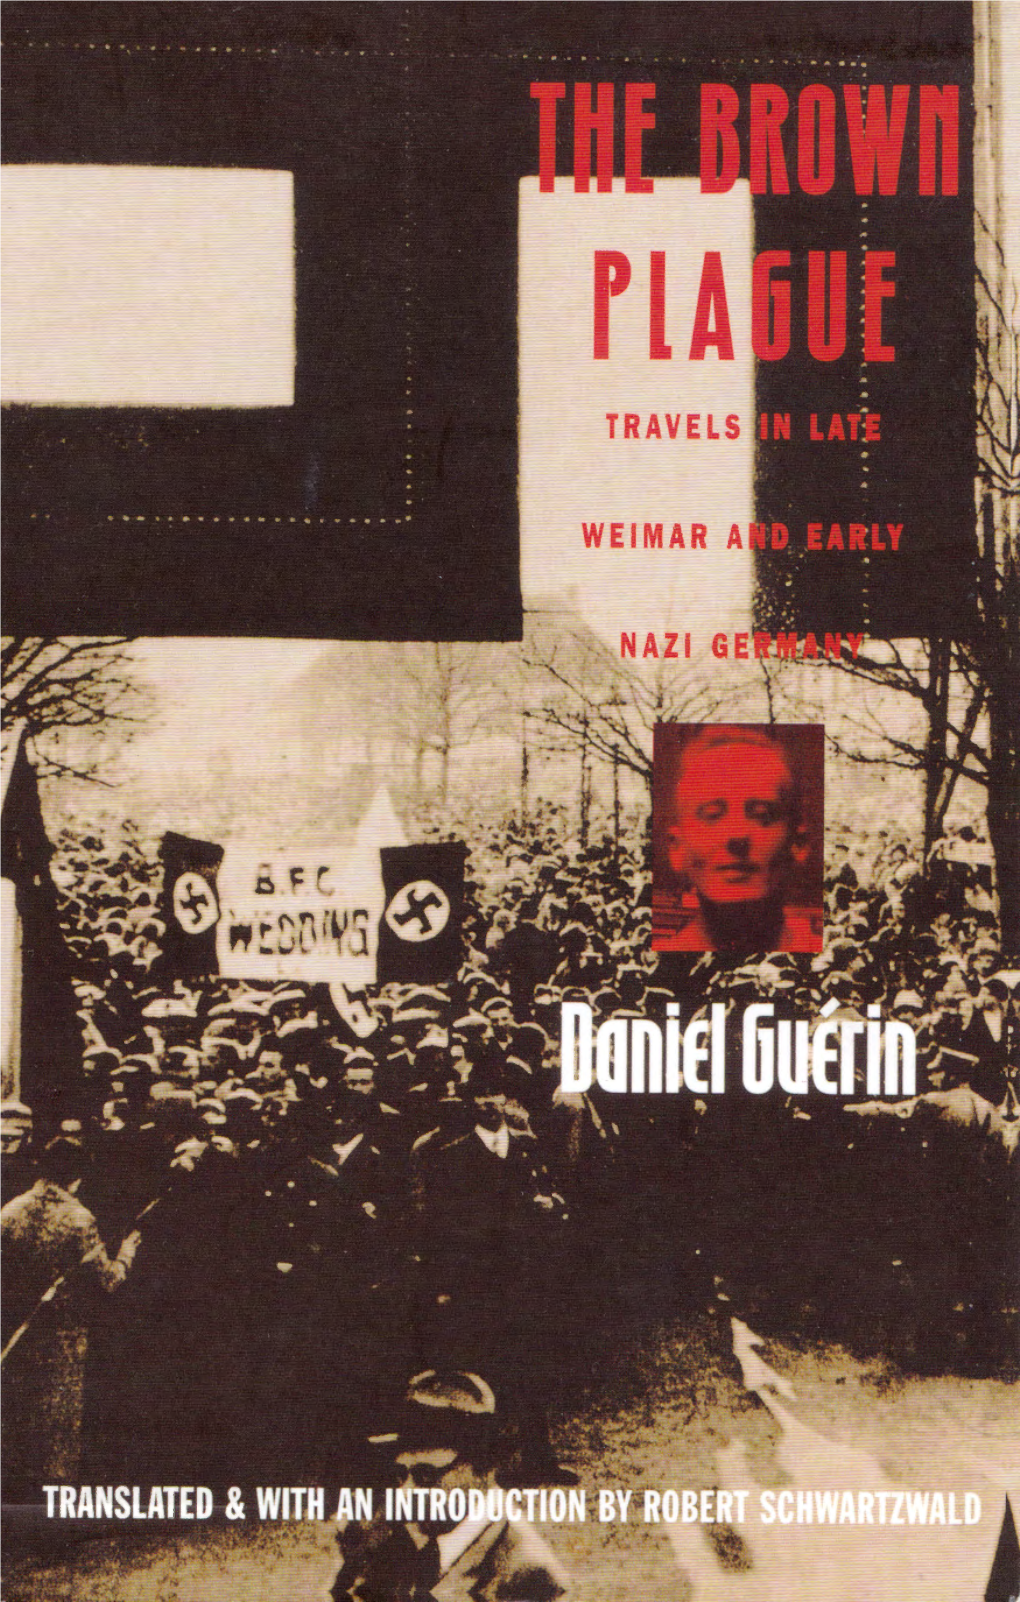 The Brown Plague) Is Daniel Guerin's Eyewitness Account of the Fall of the Weimar Republic and the First Months of the Third Reich